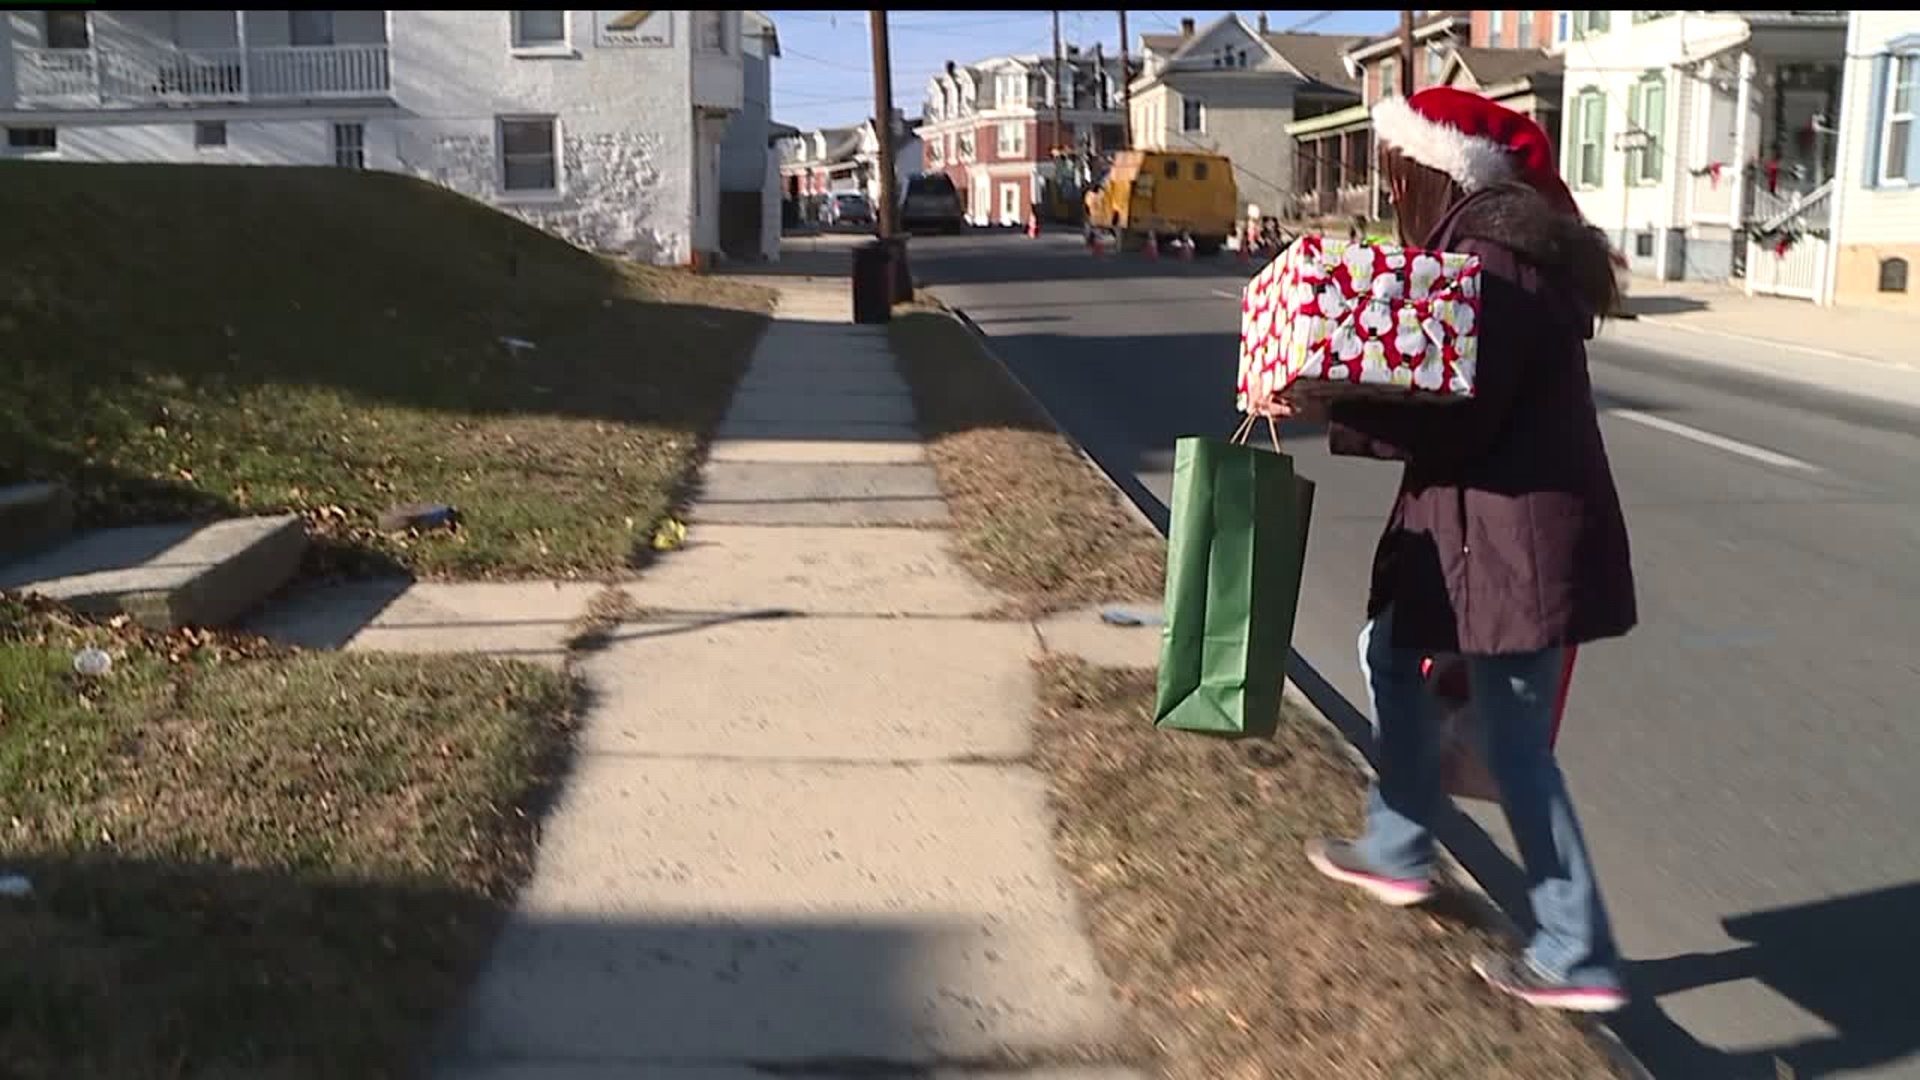 Chambersburg stolen gifts delivered